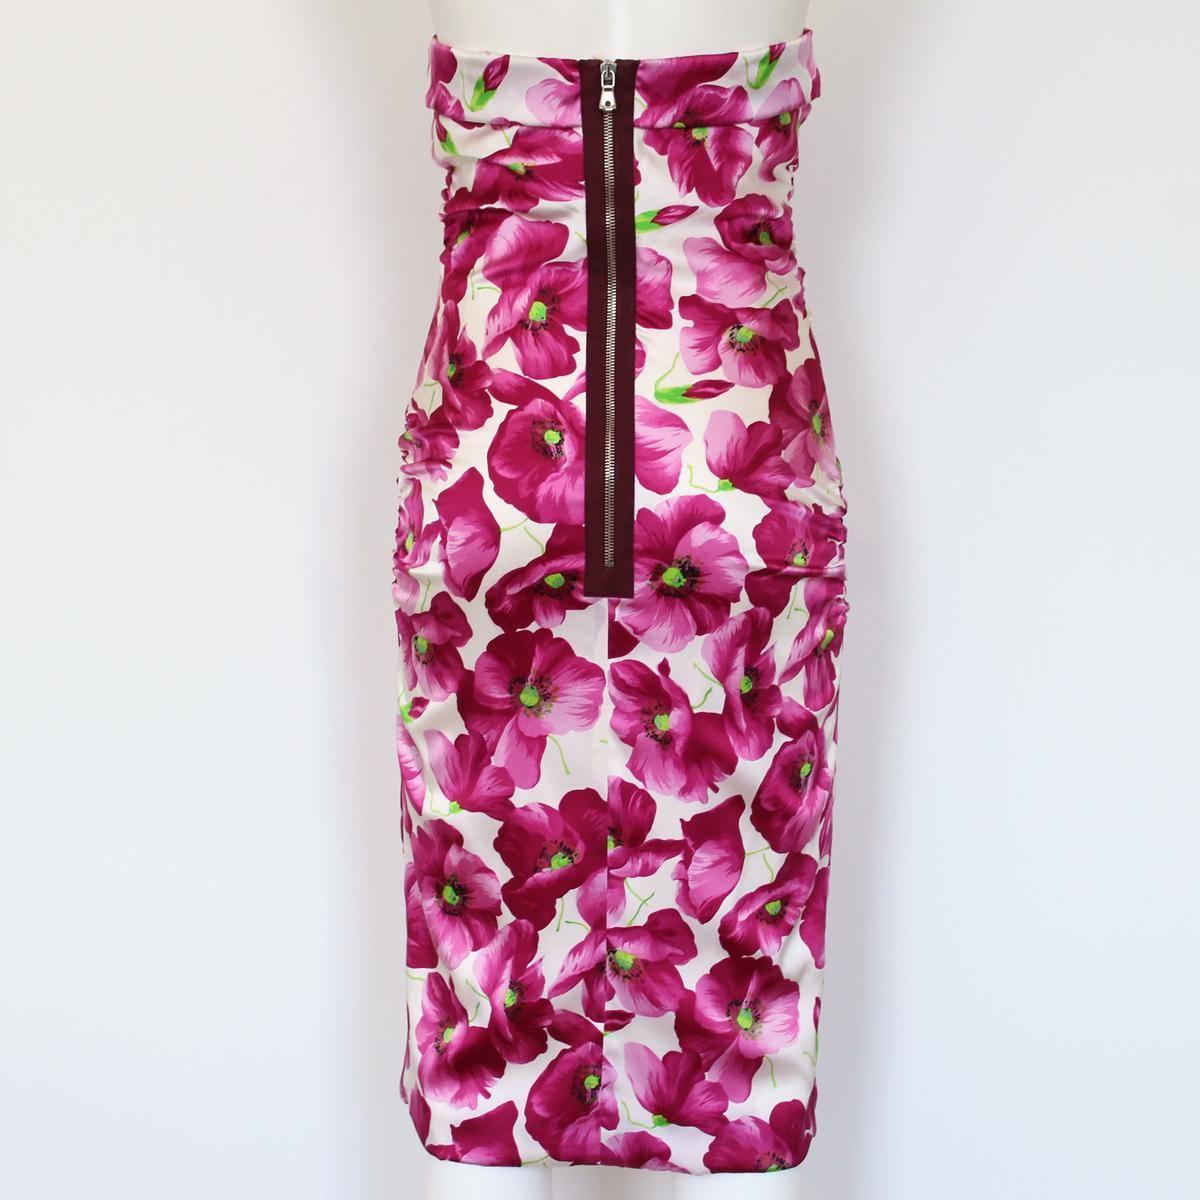 Beautiful  Dolce & Gabbana dress
Floral dress
Silk
Floral pattern
Fuchsia color
Zip on back
Total lenght cm 80 (31.4 inches)
Made in Italy
Worldwide express shipping included in the price !